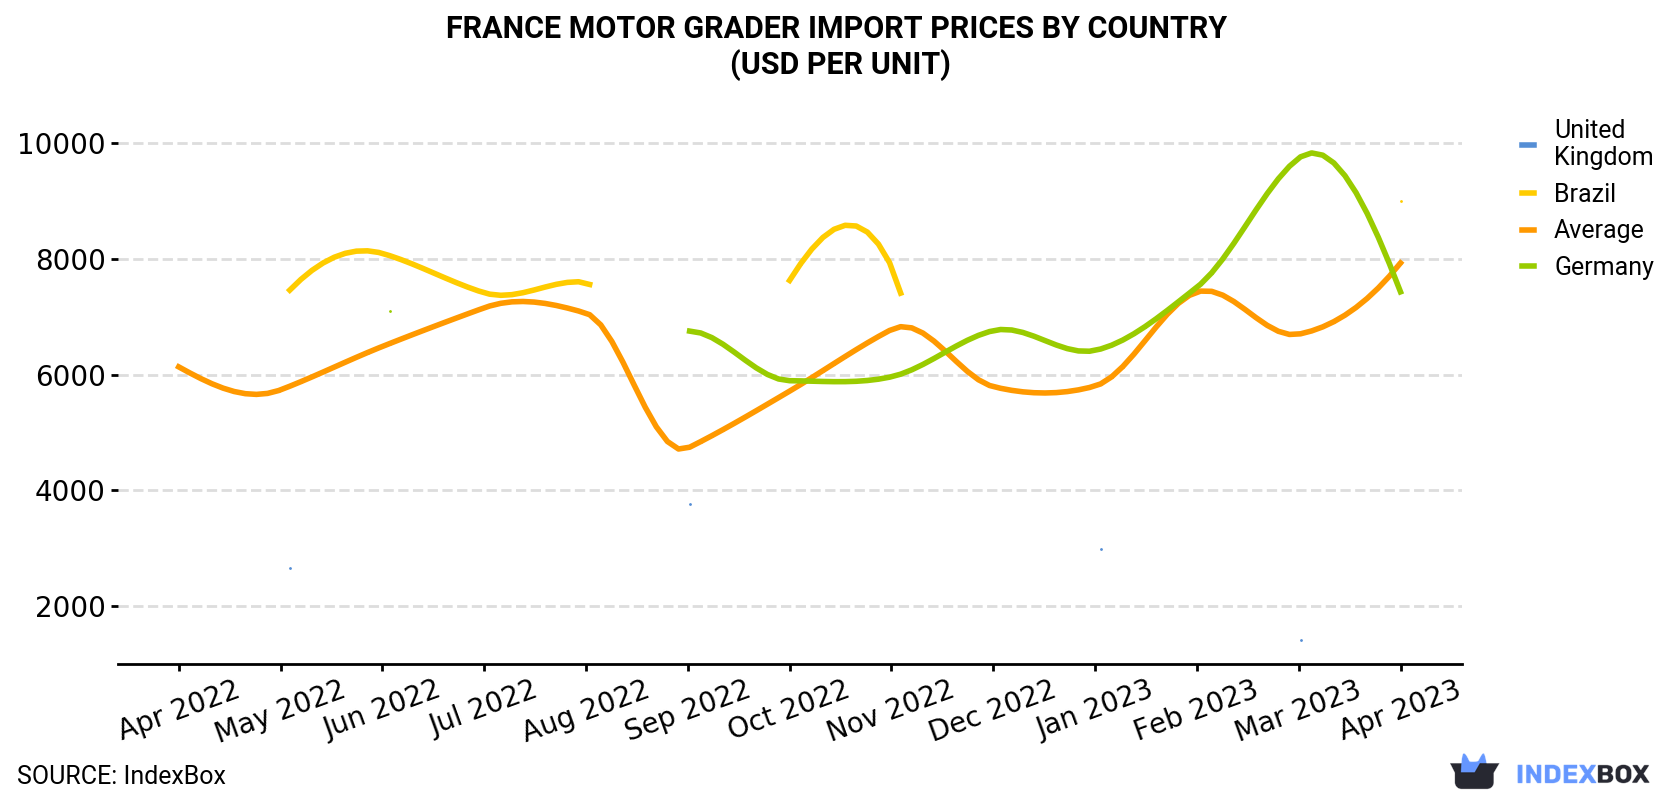 France Motor Grader Import Prices By Country (USD Per Unit)